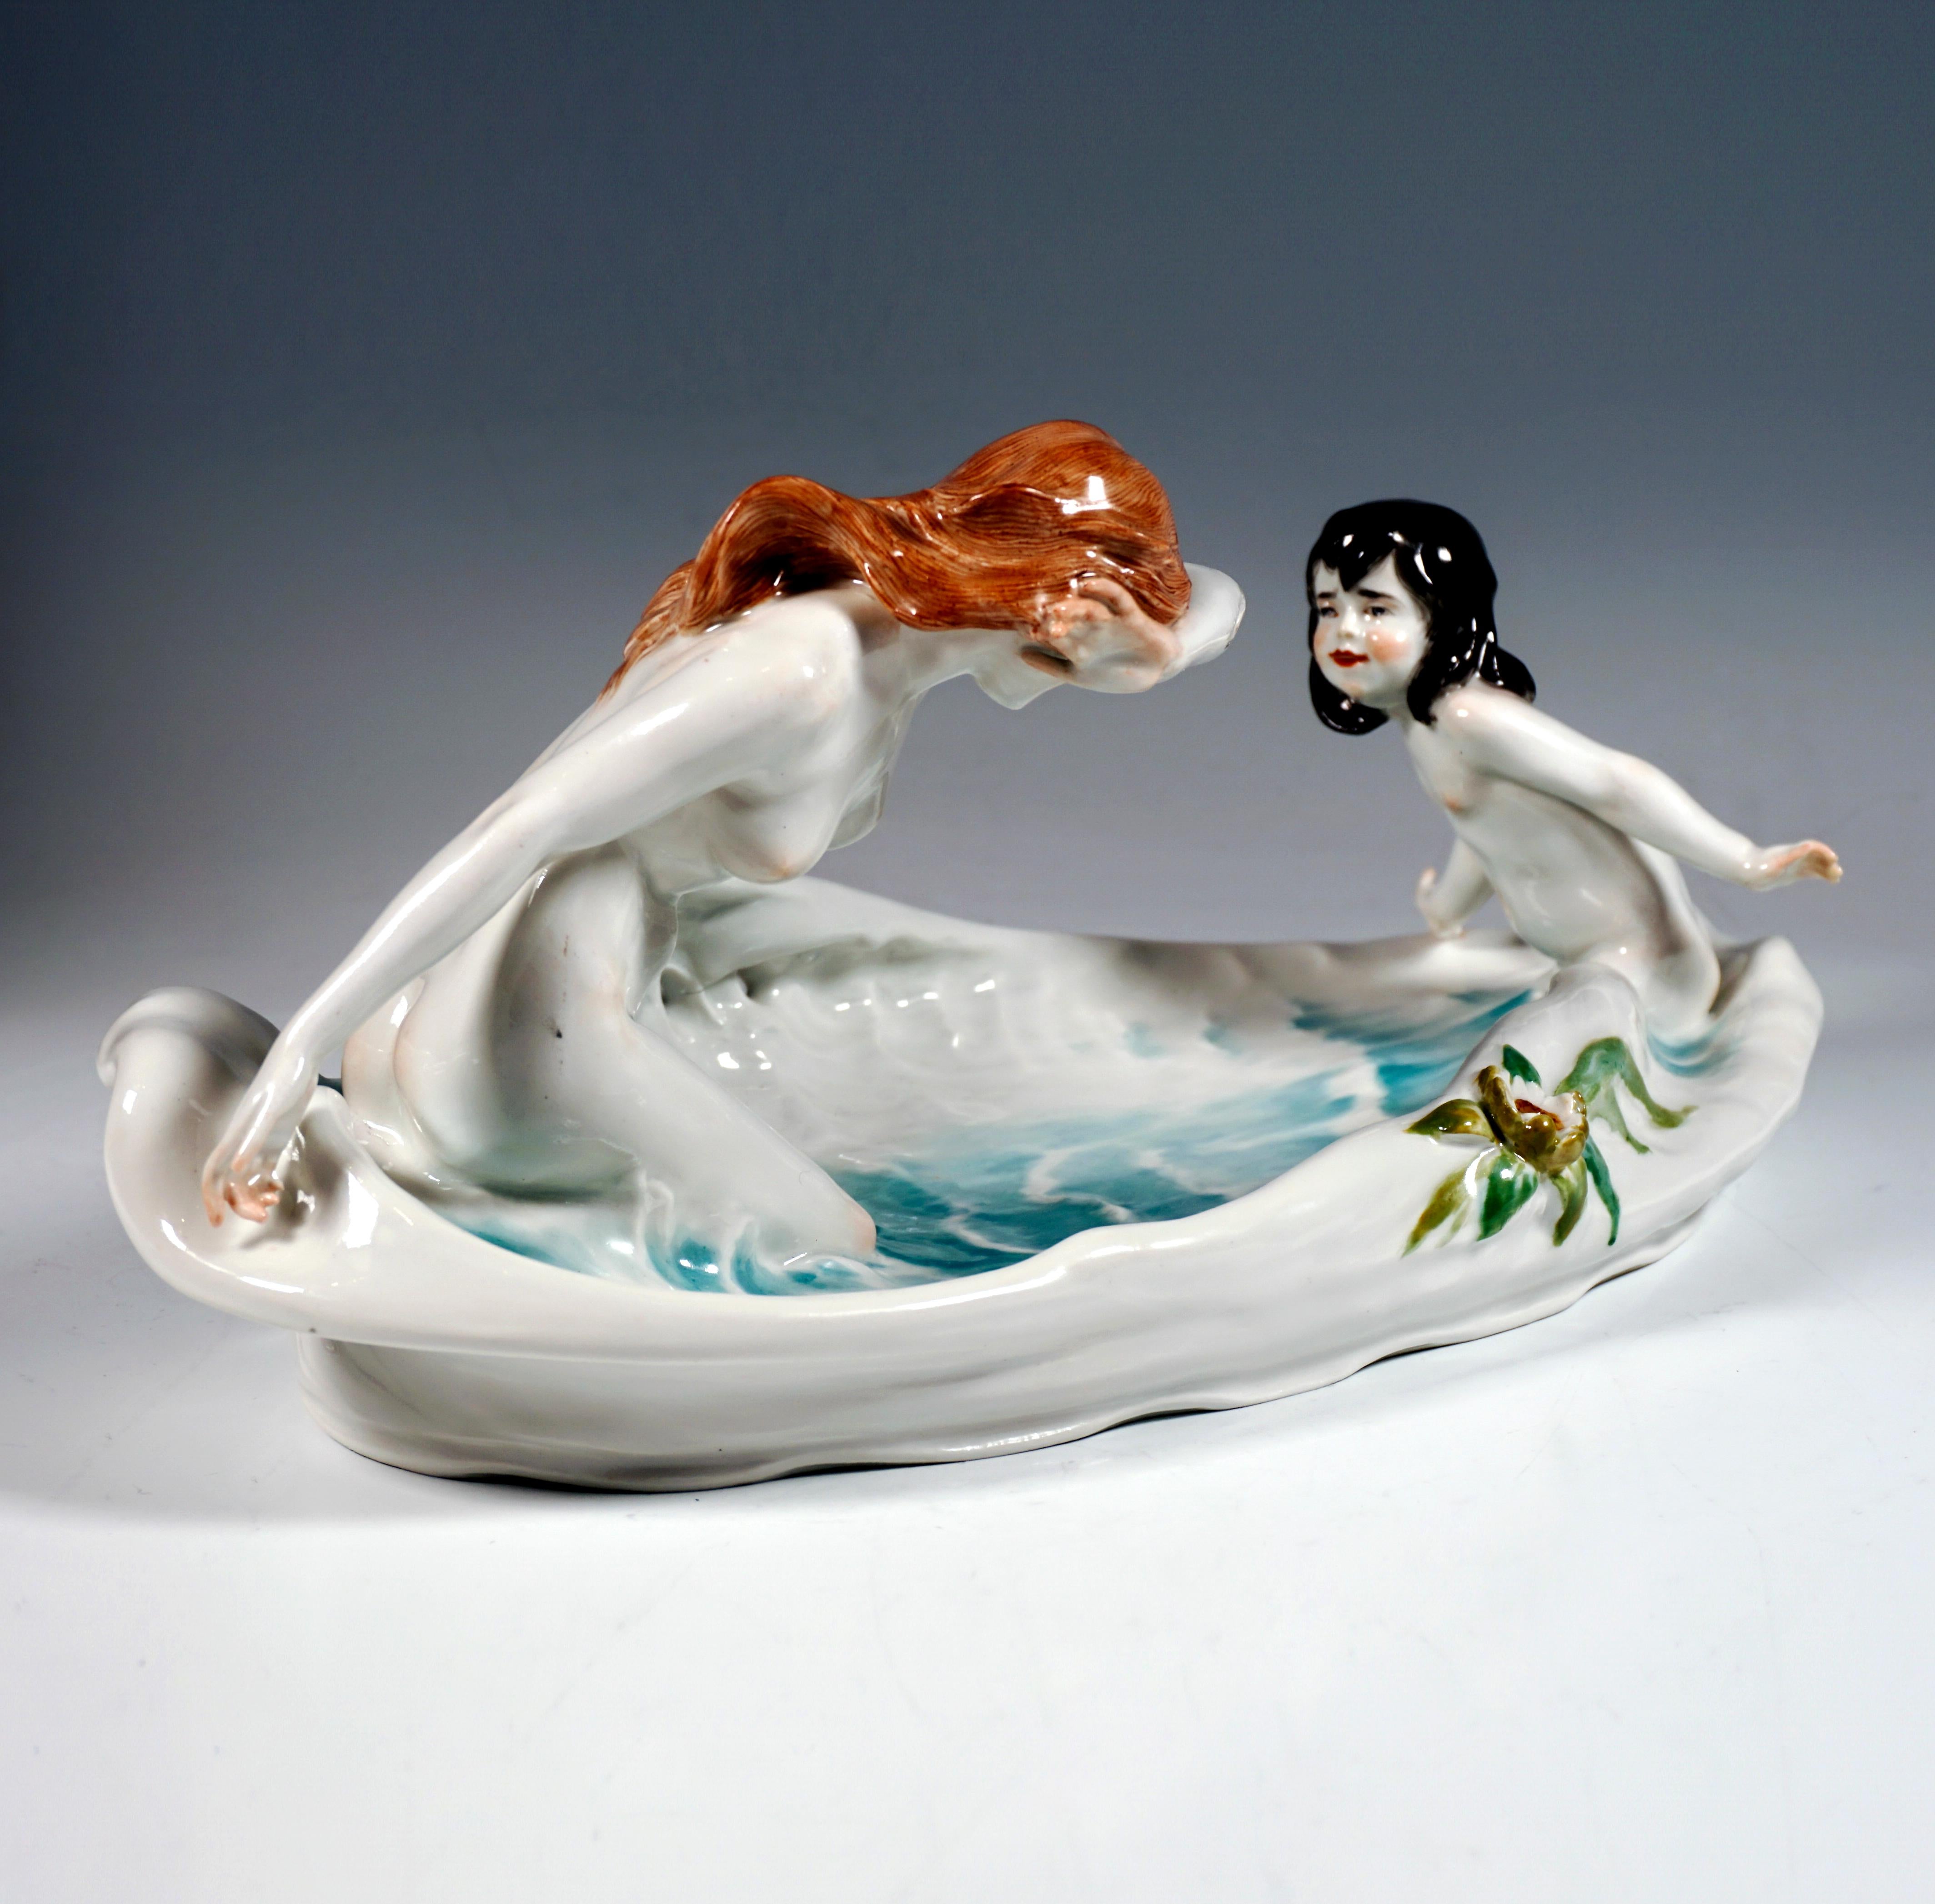 Exquisite Meissen Art Nouveau porcelain group:
Flat oval bowl with an irregular, wavy lined and partially pierced rim, on the narrow sides two naked figures facing each other, a young girl and a young woman with long hair playing in the waist-deep,